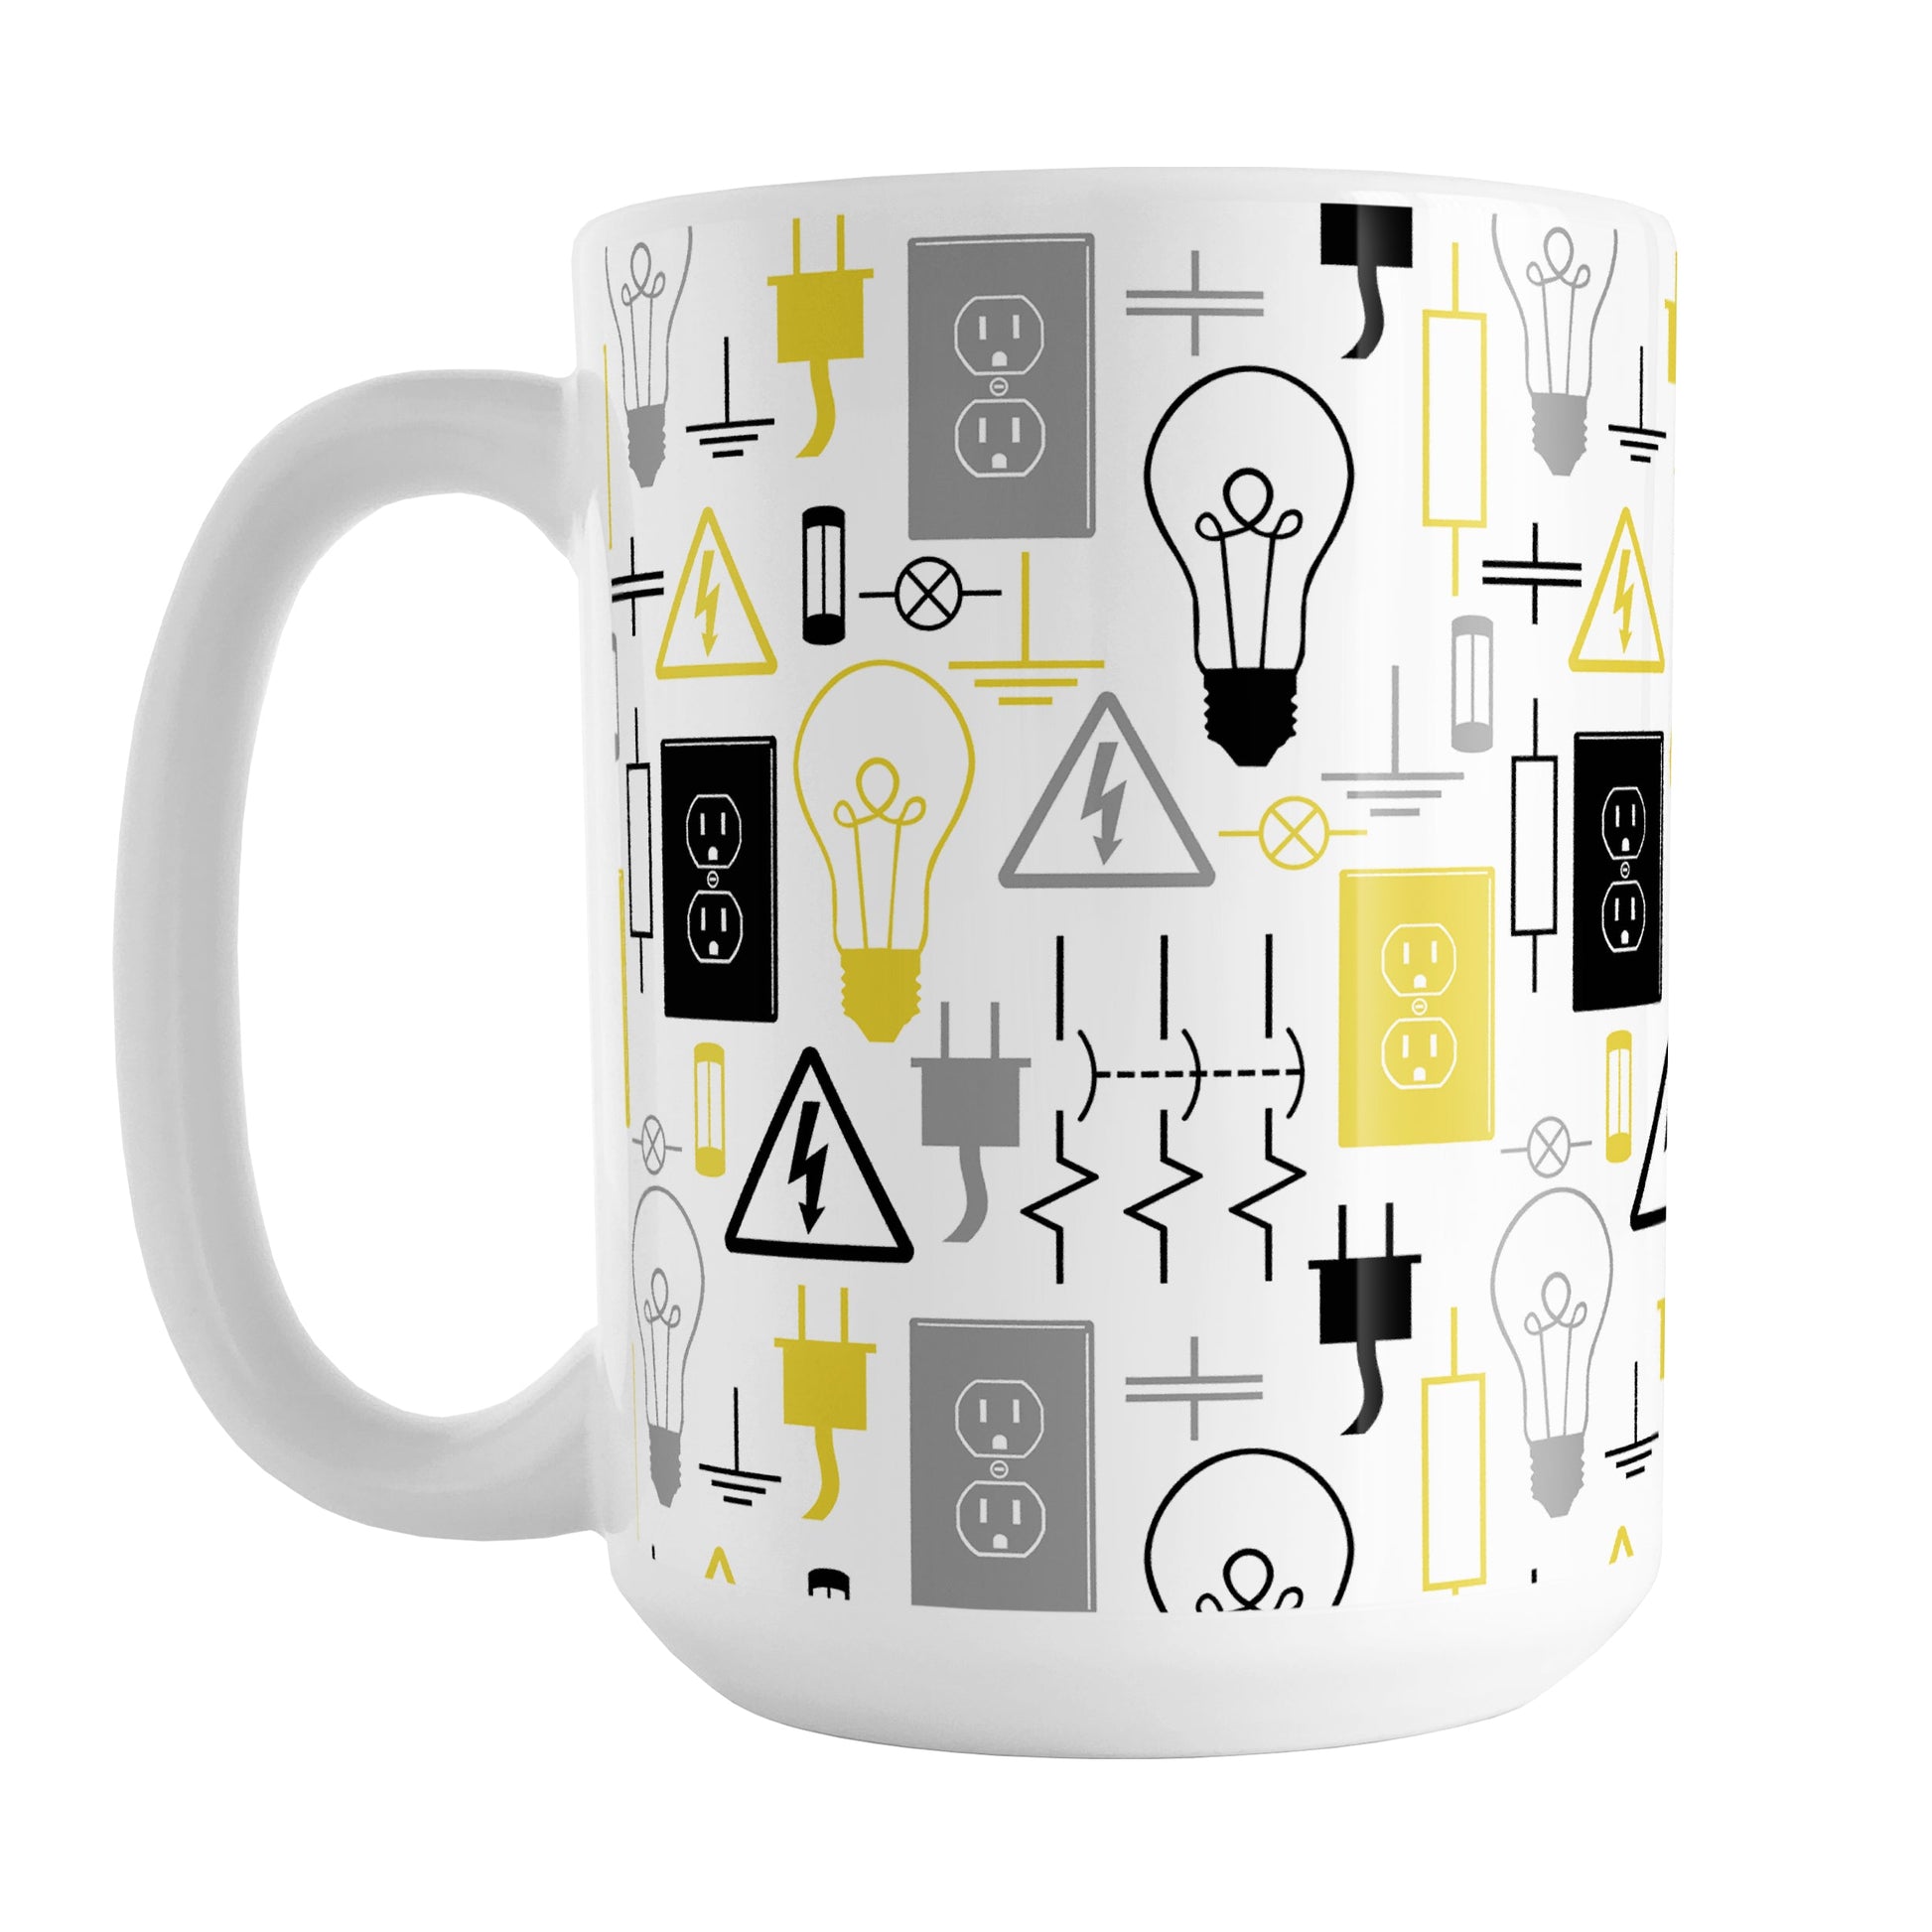 Yellow Electrical Pattern Mug (15oz) at Amy's Coffee Mugs. A ceramic coffee mug designed with an electrical pattern with light bulbs, wall sockets, plugs, fuses, and other electricity symbols in yellow, gray, and black colors. This mug is perfect for people who work a trade as an electrician or love working with electronics. 